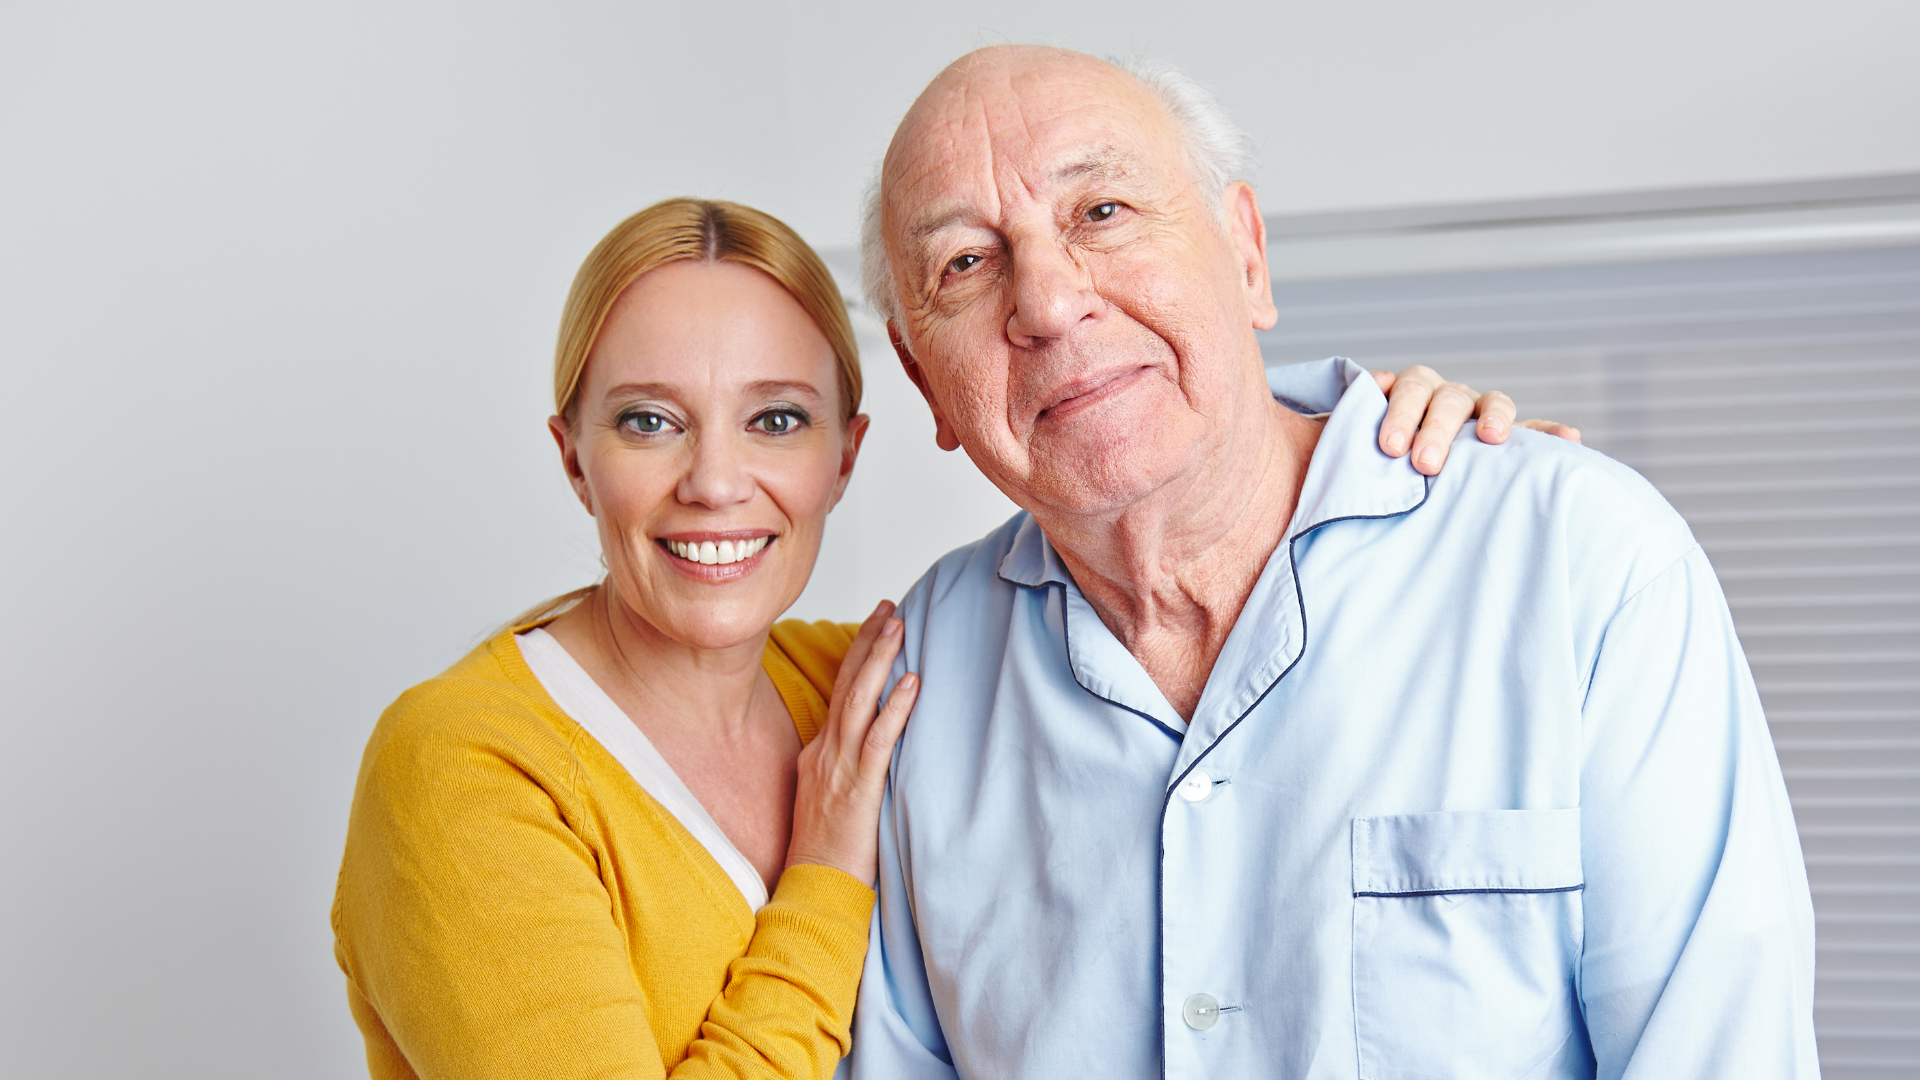 5 Ways to Show Your Appreciation During National Family Caregivers Month